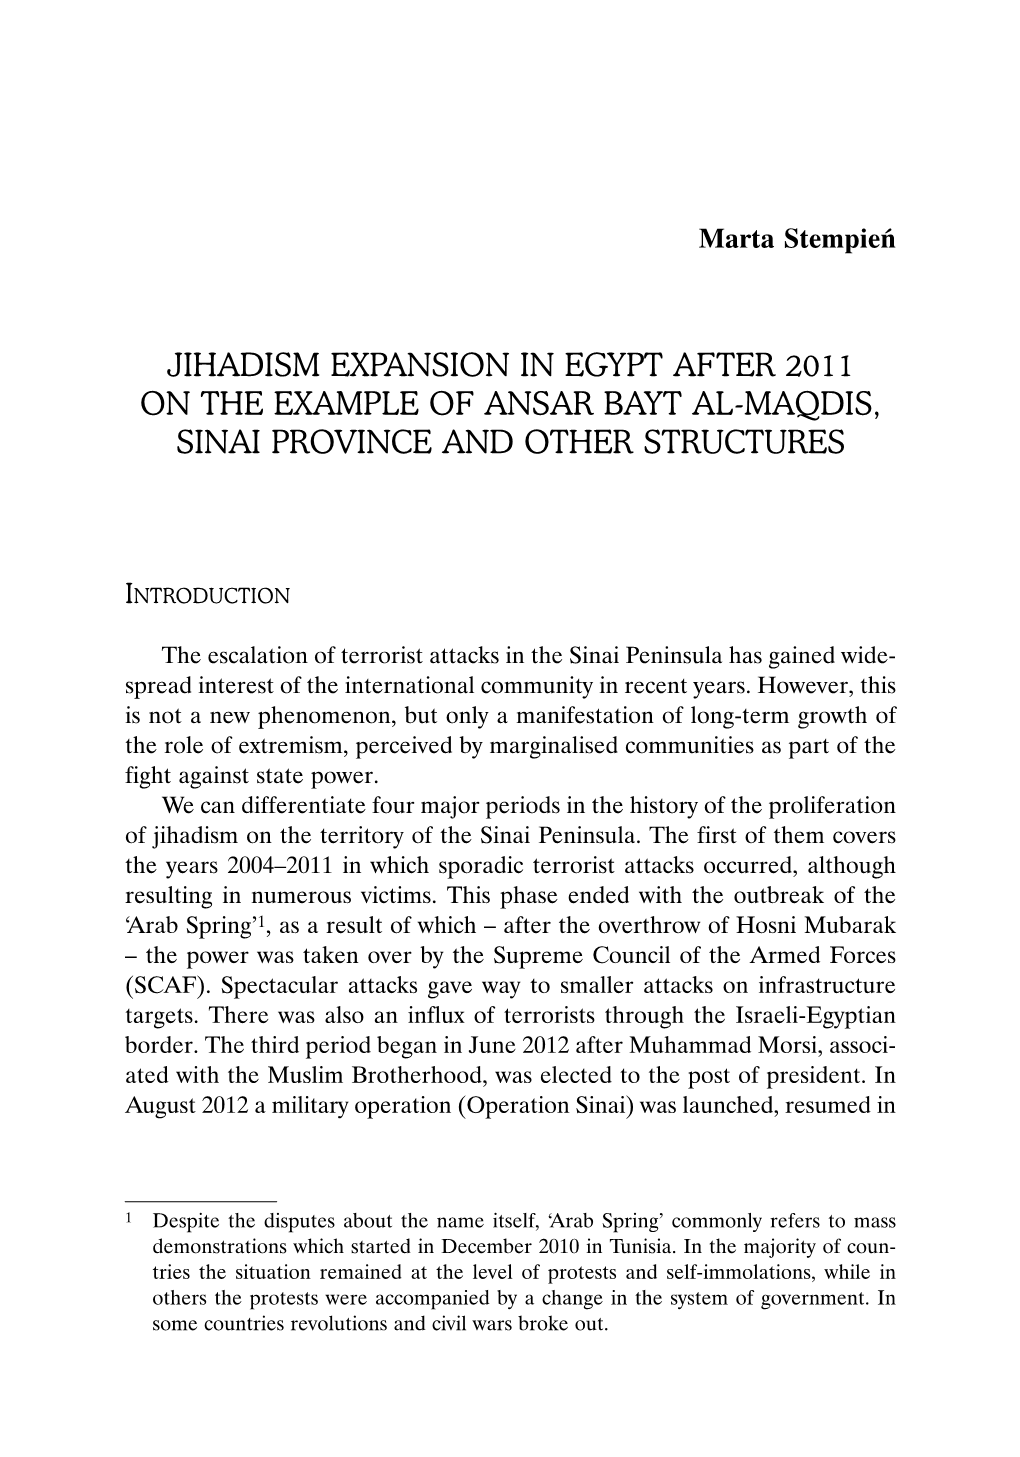 Jihadism Expansion in Egypt After 2011 on the Example of Ansar Bayt Al-Maqdis, Sinai Province and Other Structures